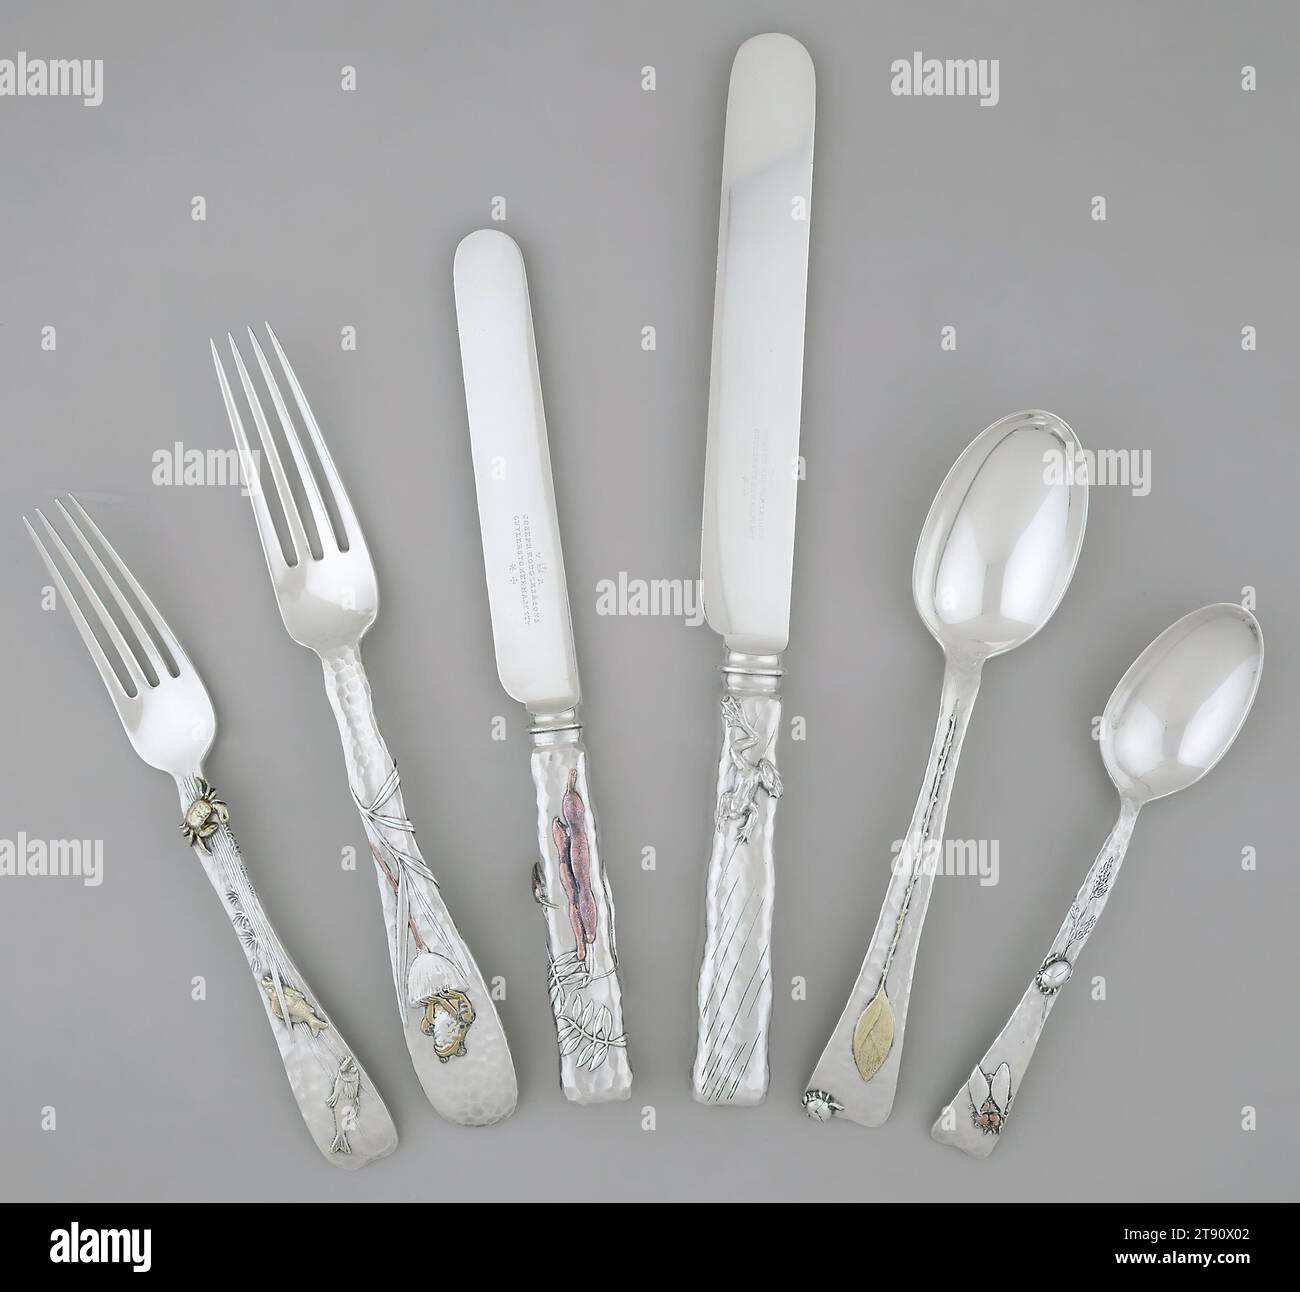 Lap-Over-Edge' Flatware, 1880, Charles T. Grosjean; Maker: Tiffany & Co.; Caster: Joseph Rodgers and Sons (knife blades), American, 1/2 x 11 1/2 x 7/8 in. (1.27 x 29.21 x 2.22 cm), Silver, gold, copper, and bronze, United States, 19th century, This opulently naturalistic flatware incorporates Japanese motifs such as plants, flowers, insects, and animals. Edward C. Moore, Tiffany's head designer from 1869-1891, had admired Japanese art and design at the 1867 Exposition Universelle in Paris, and began working with his designer Grosjean to incorporate Japanese motifs into Tiffany's projects Stock Photo